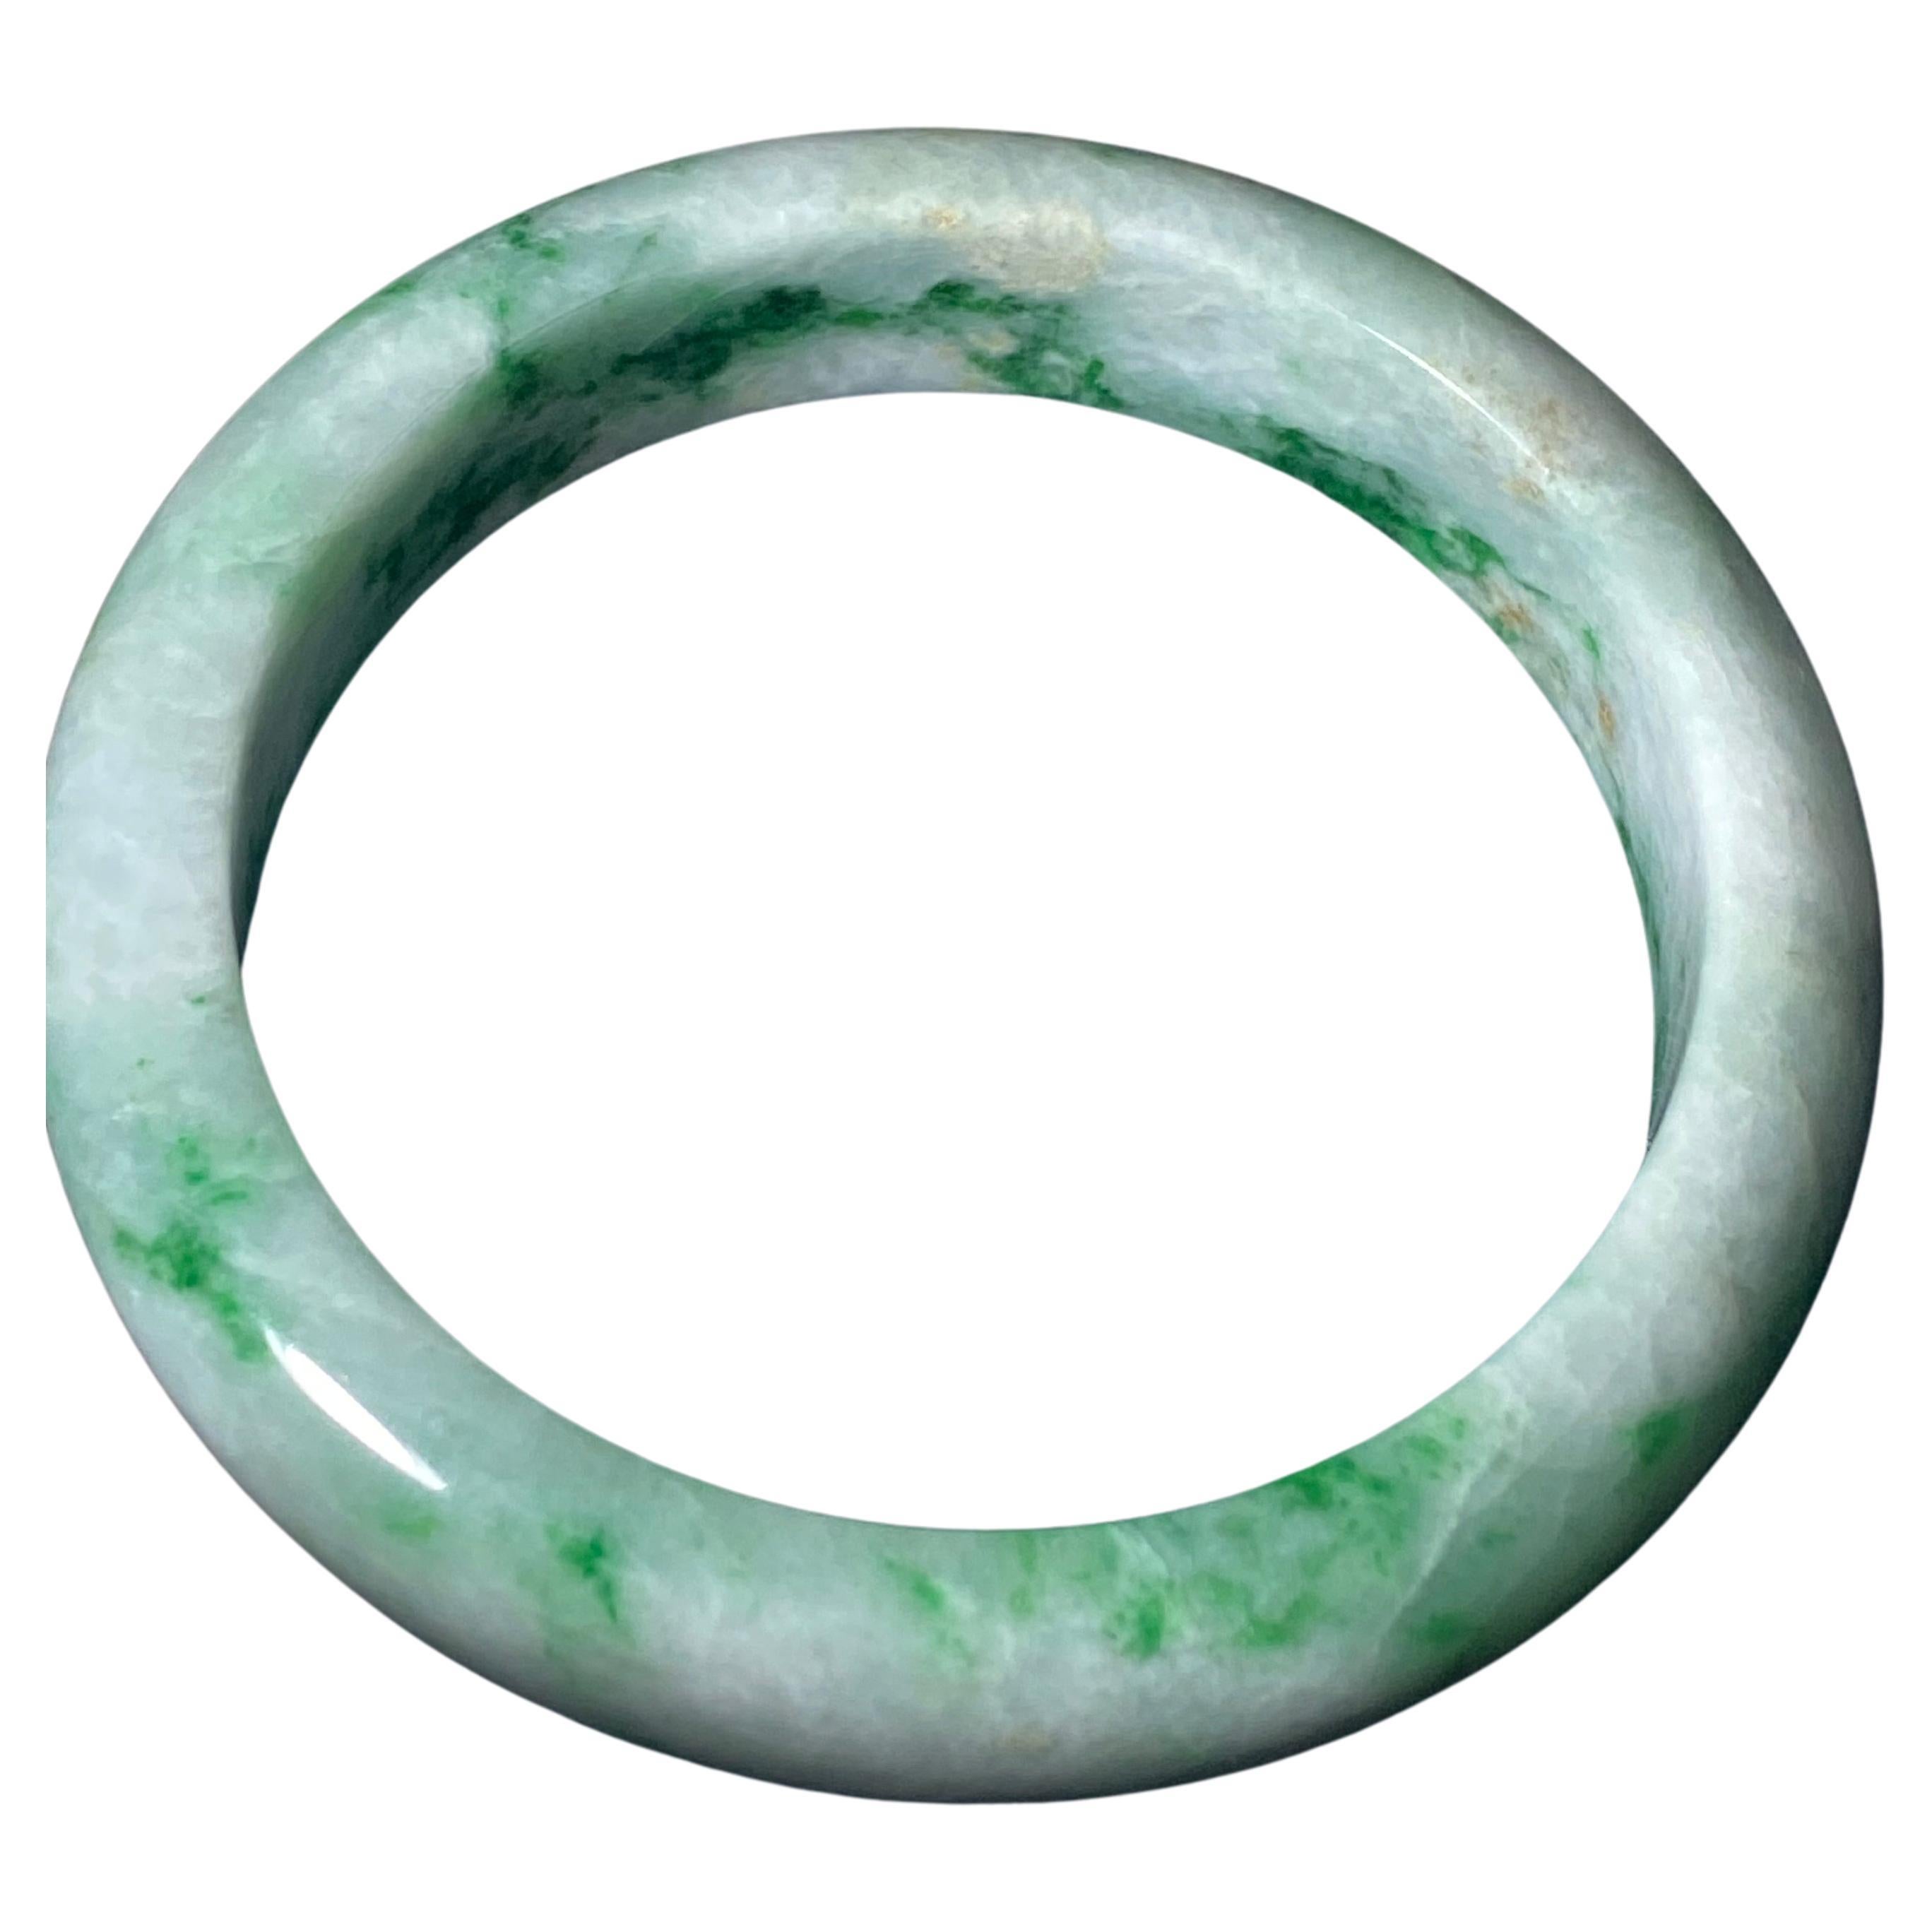 Rounded Green & White Jade Bangle, 65.3gr. 15mm wide, 21cm circumference. For Sale